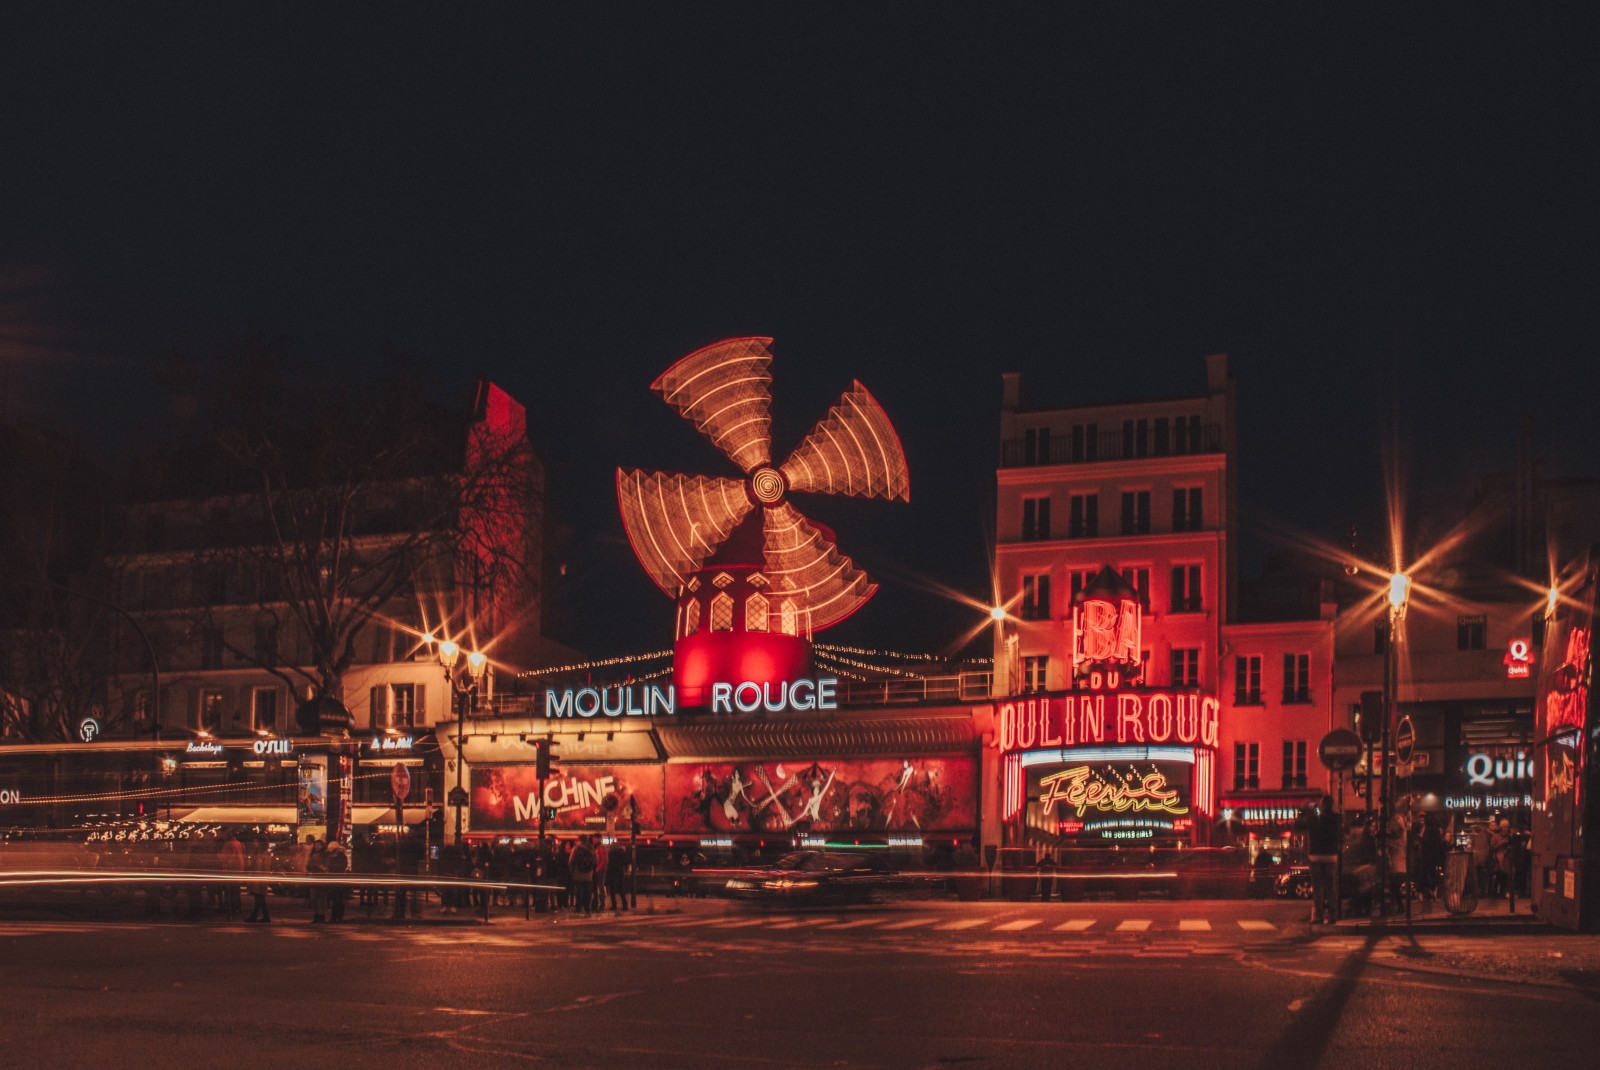 red moulin rouge night paris france spinning windmill buildings street lamps